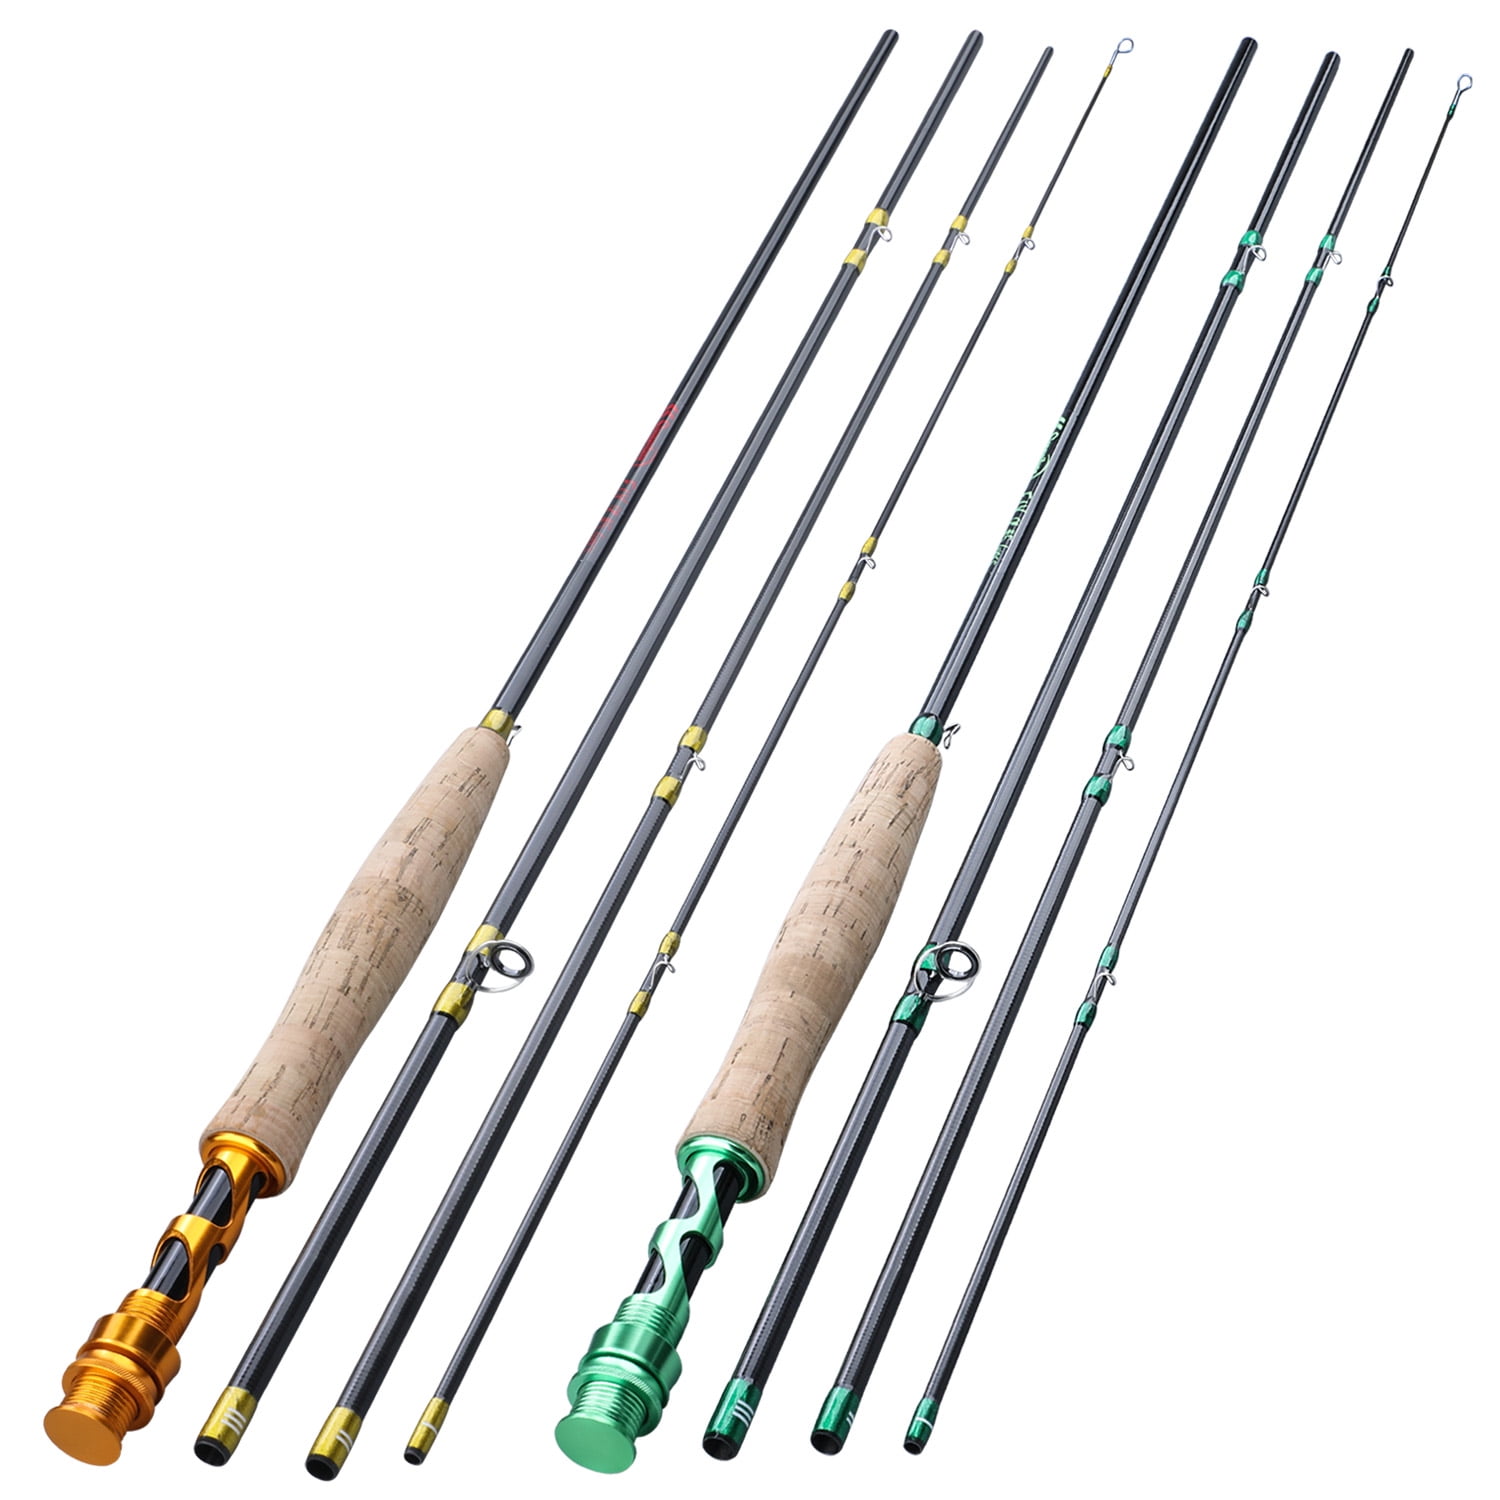 Aventik Stalker Fly Rods IM12 7'6'' LW2 8'6'' LW4 All in 4 Pieces Fast Action Super Compact Freshwater Ultra Light Fly Fishing Rods 8'0'' LW3 